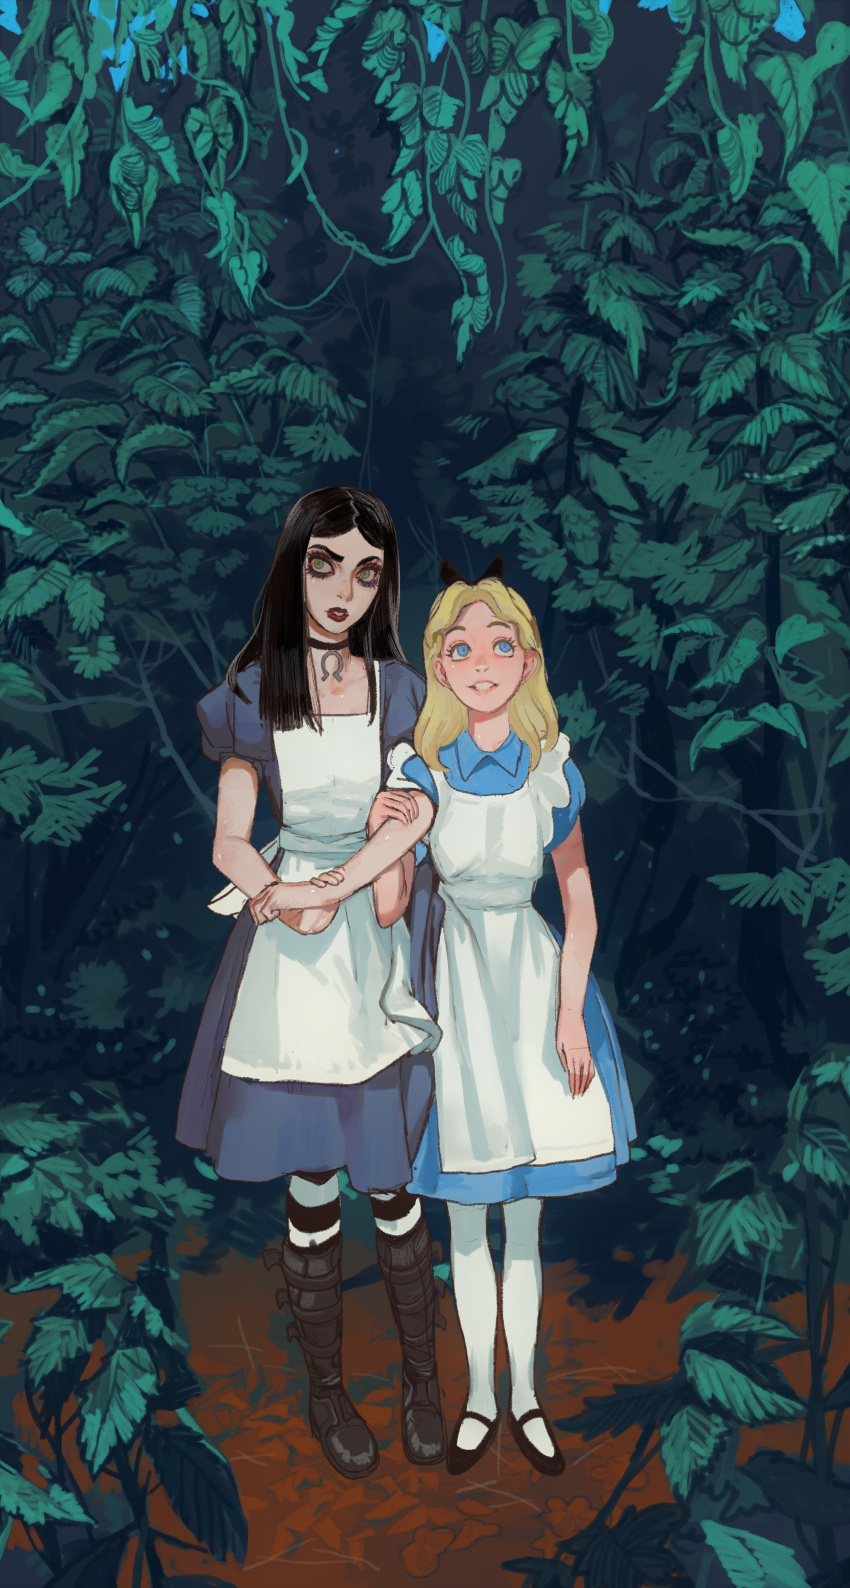 2girls absurdres alice_(alice_in_wonderland) alice_in_wonderland american_mcgee's_alice apron black_bow black_eyeshadow black_footwear black_hair blonde_hair blue_dress blue_eyes boots bow dress eyeshadow green_eyes hair_bow highres jewelry locked_arms makeup mary_janes mossacannibalis multiple_girls necklace open_mouth plant puffy_sleeves red_lips shoes short_sleeves standing striped striped_legwear white_apron white_legwear